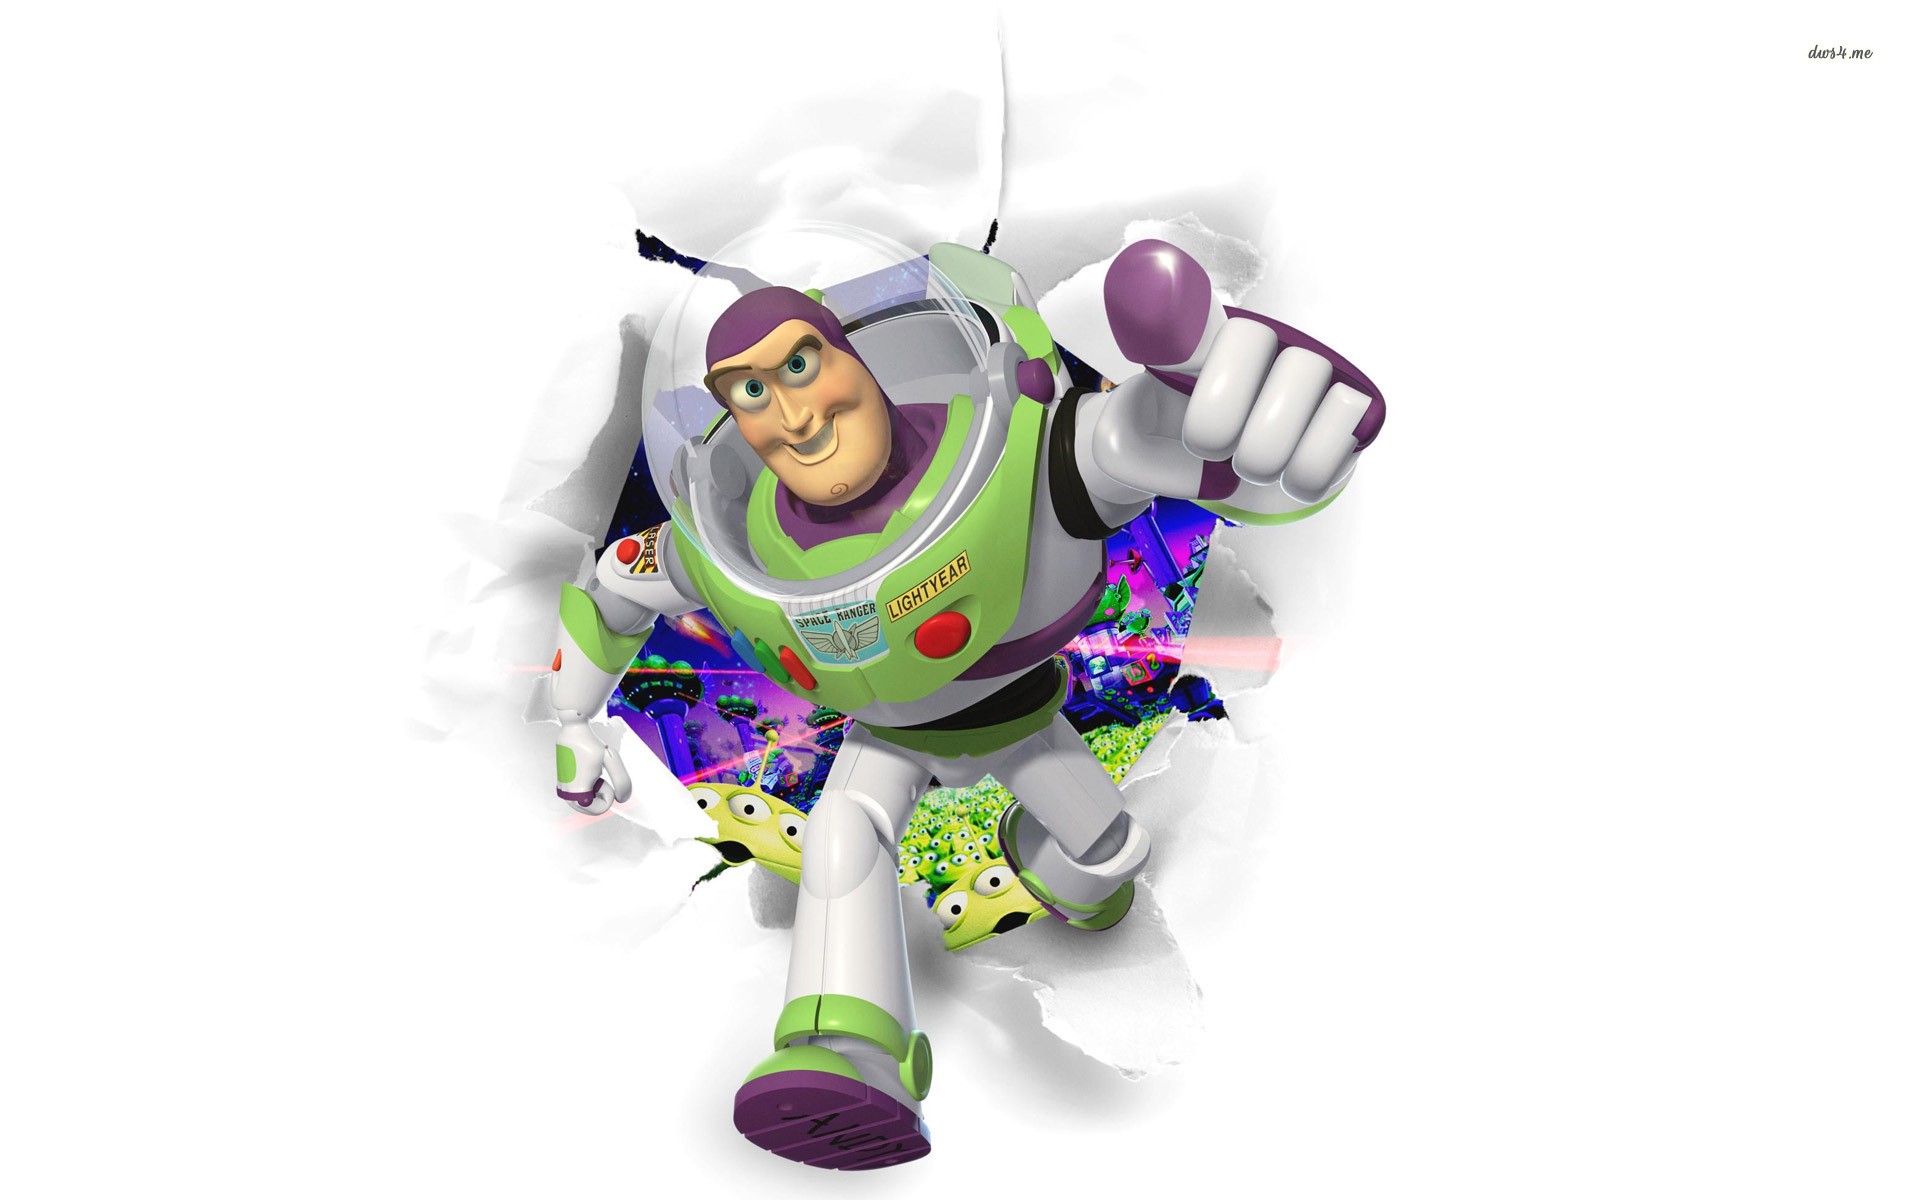 General 1920x1200 Buzz Lightyear Toy Story movies animated movies Pixar Animation Studios simple background white background